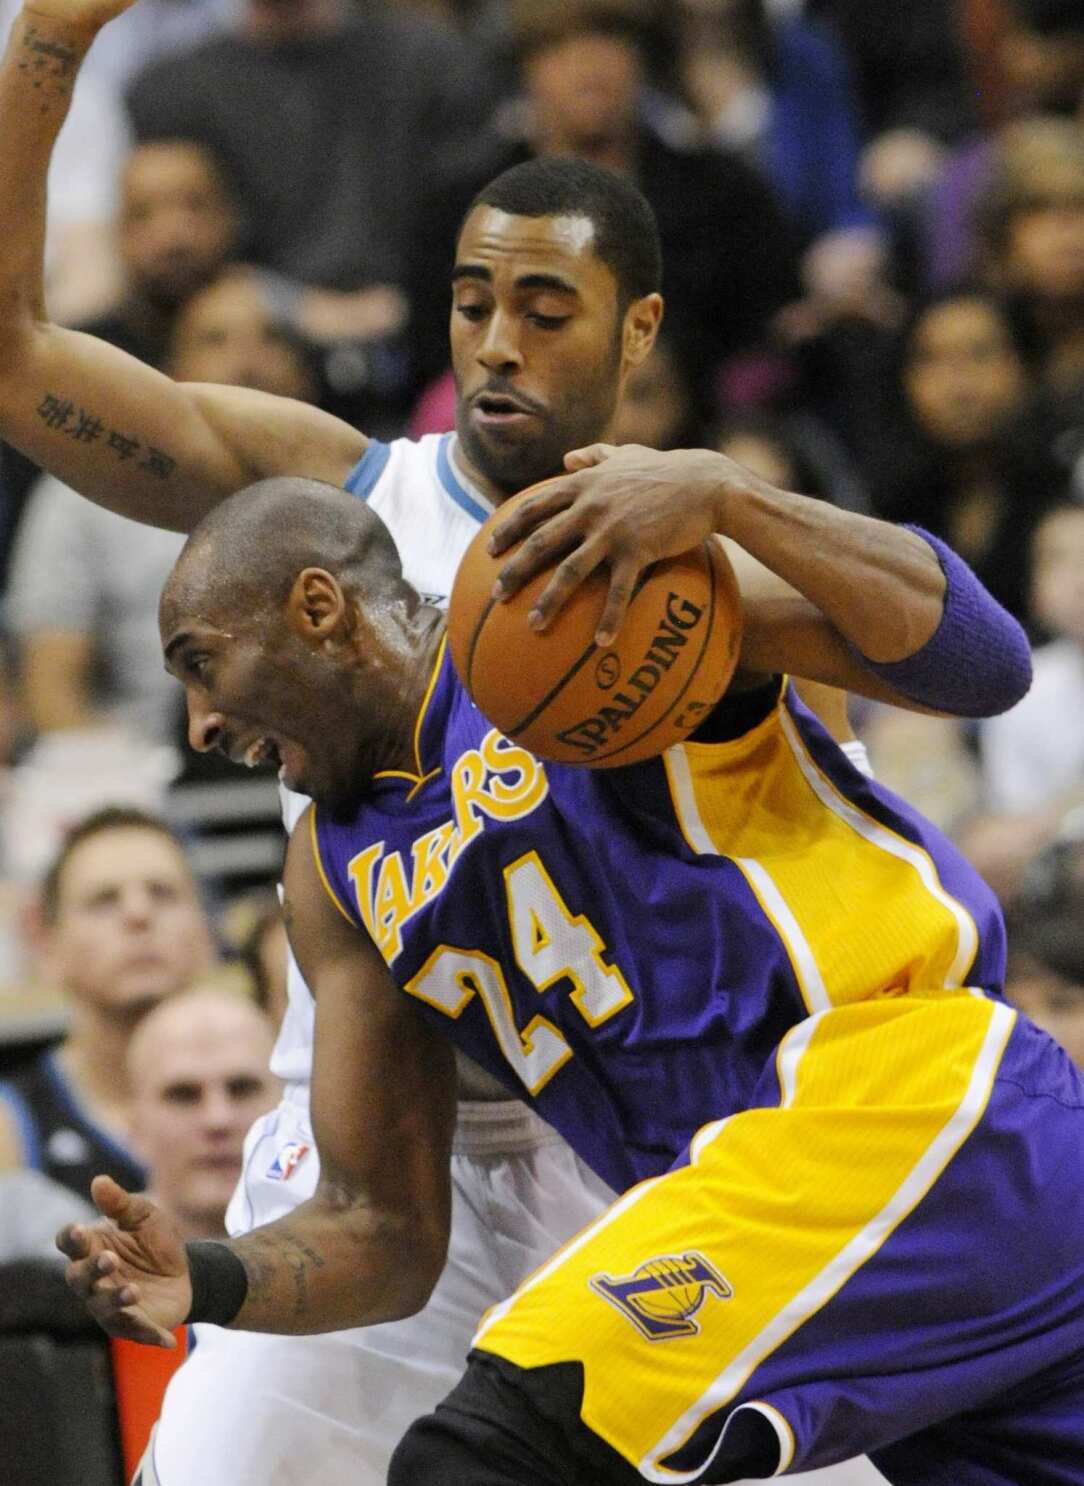 Wayne Ellington discusses how the Lakers' frontcourt will help guards